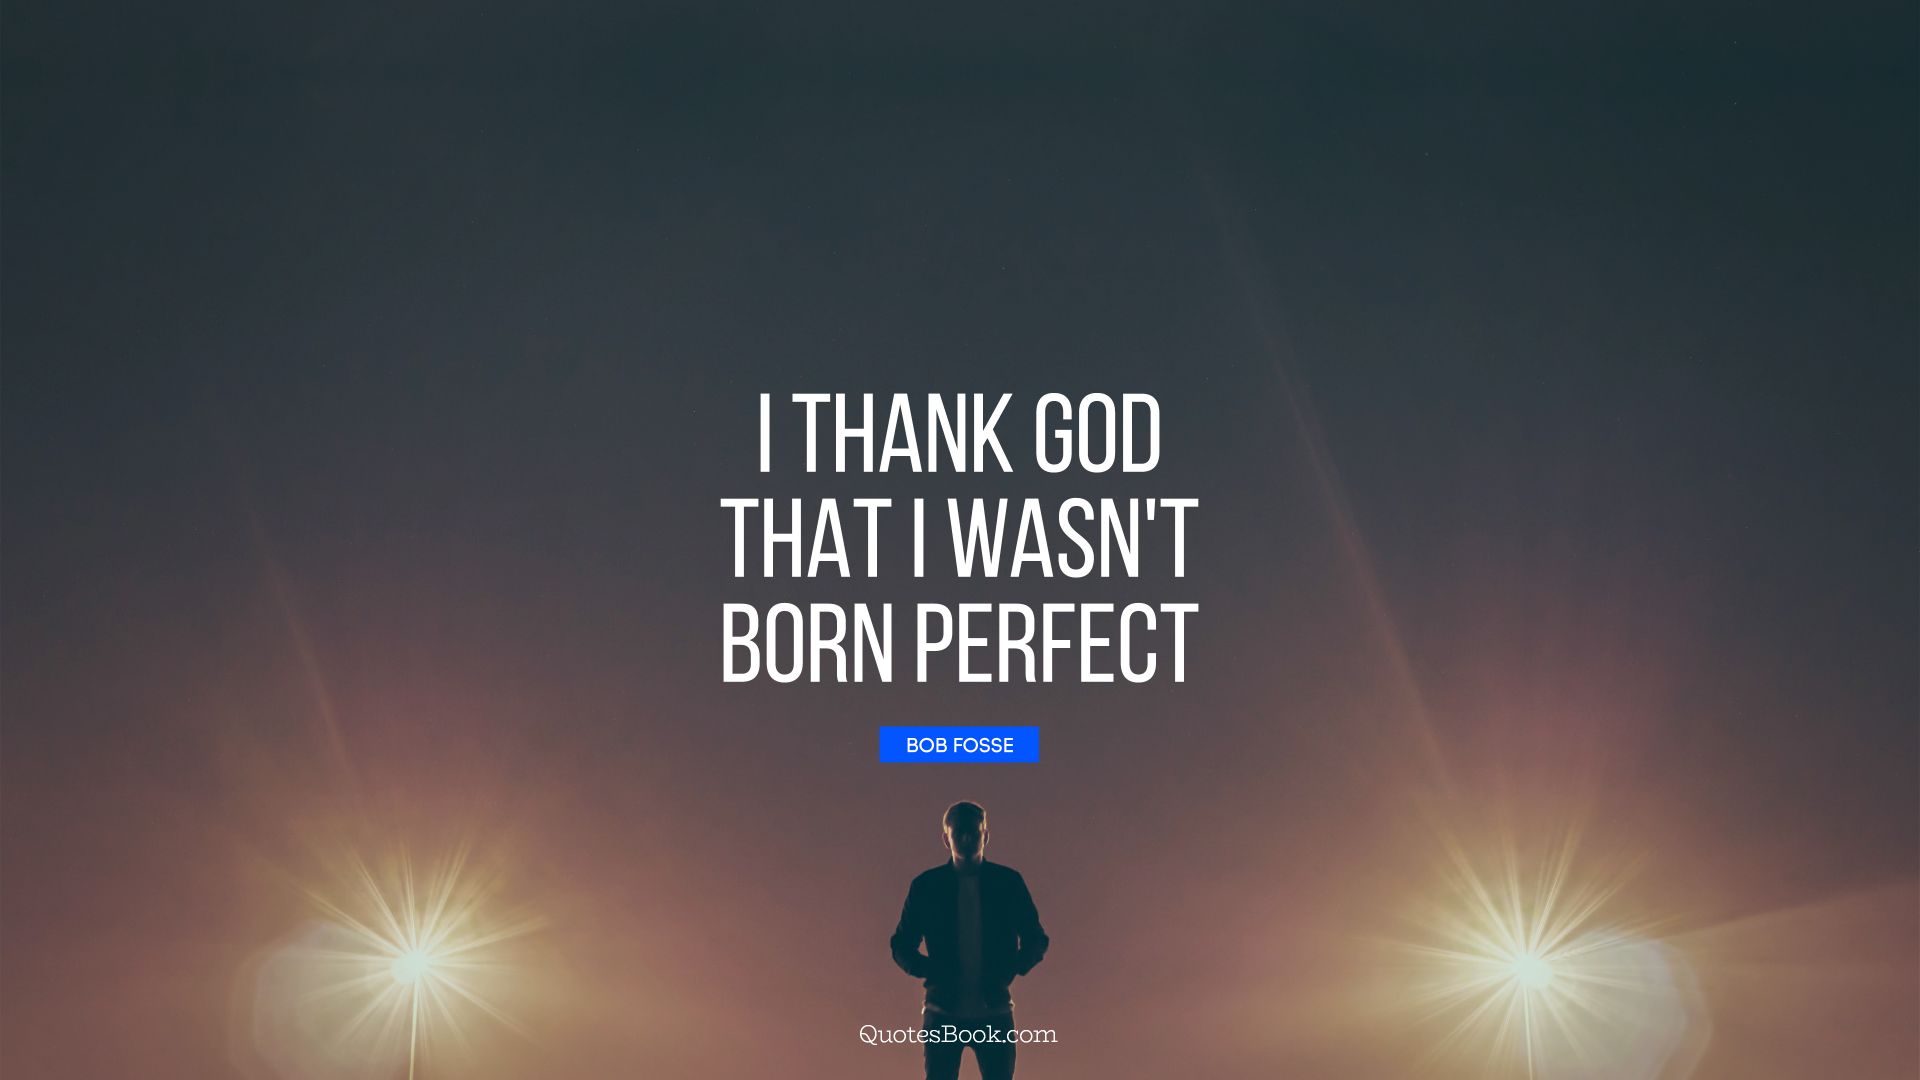 I thank God that I wasn't born perfect. - Quote by Bob Fosse